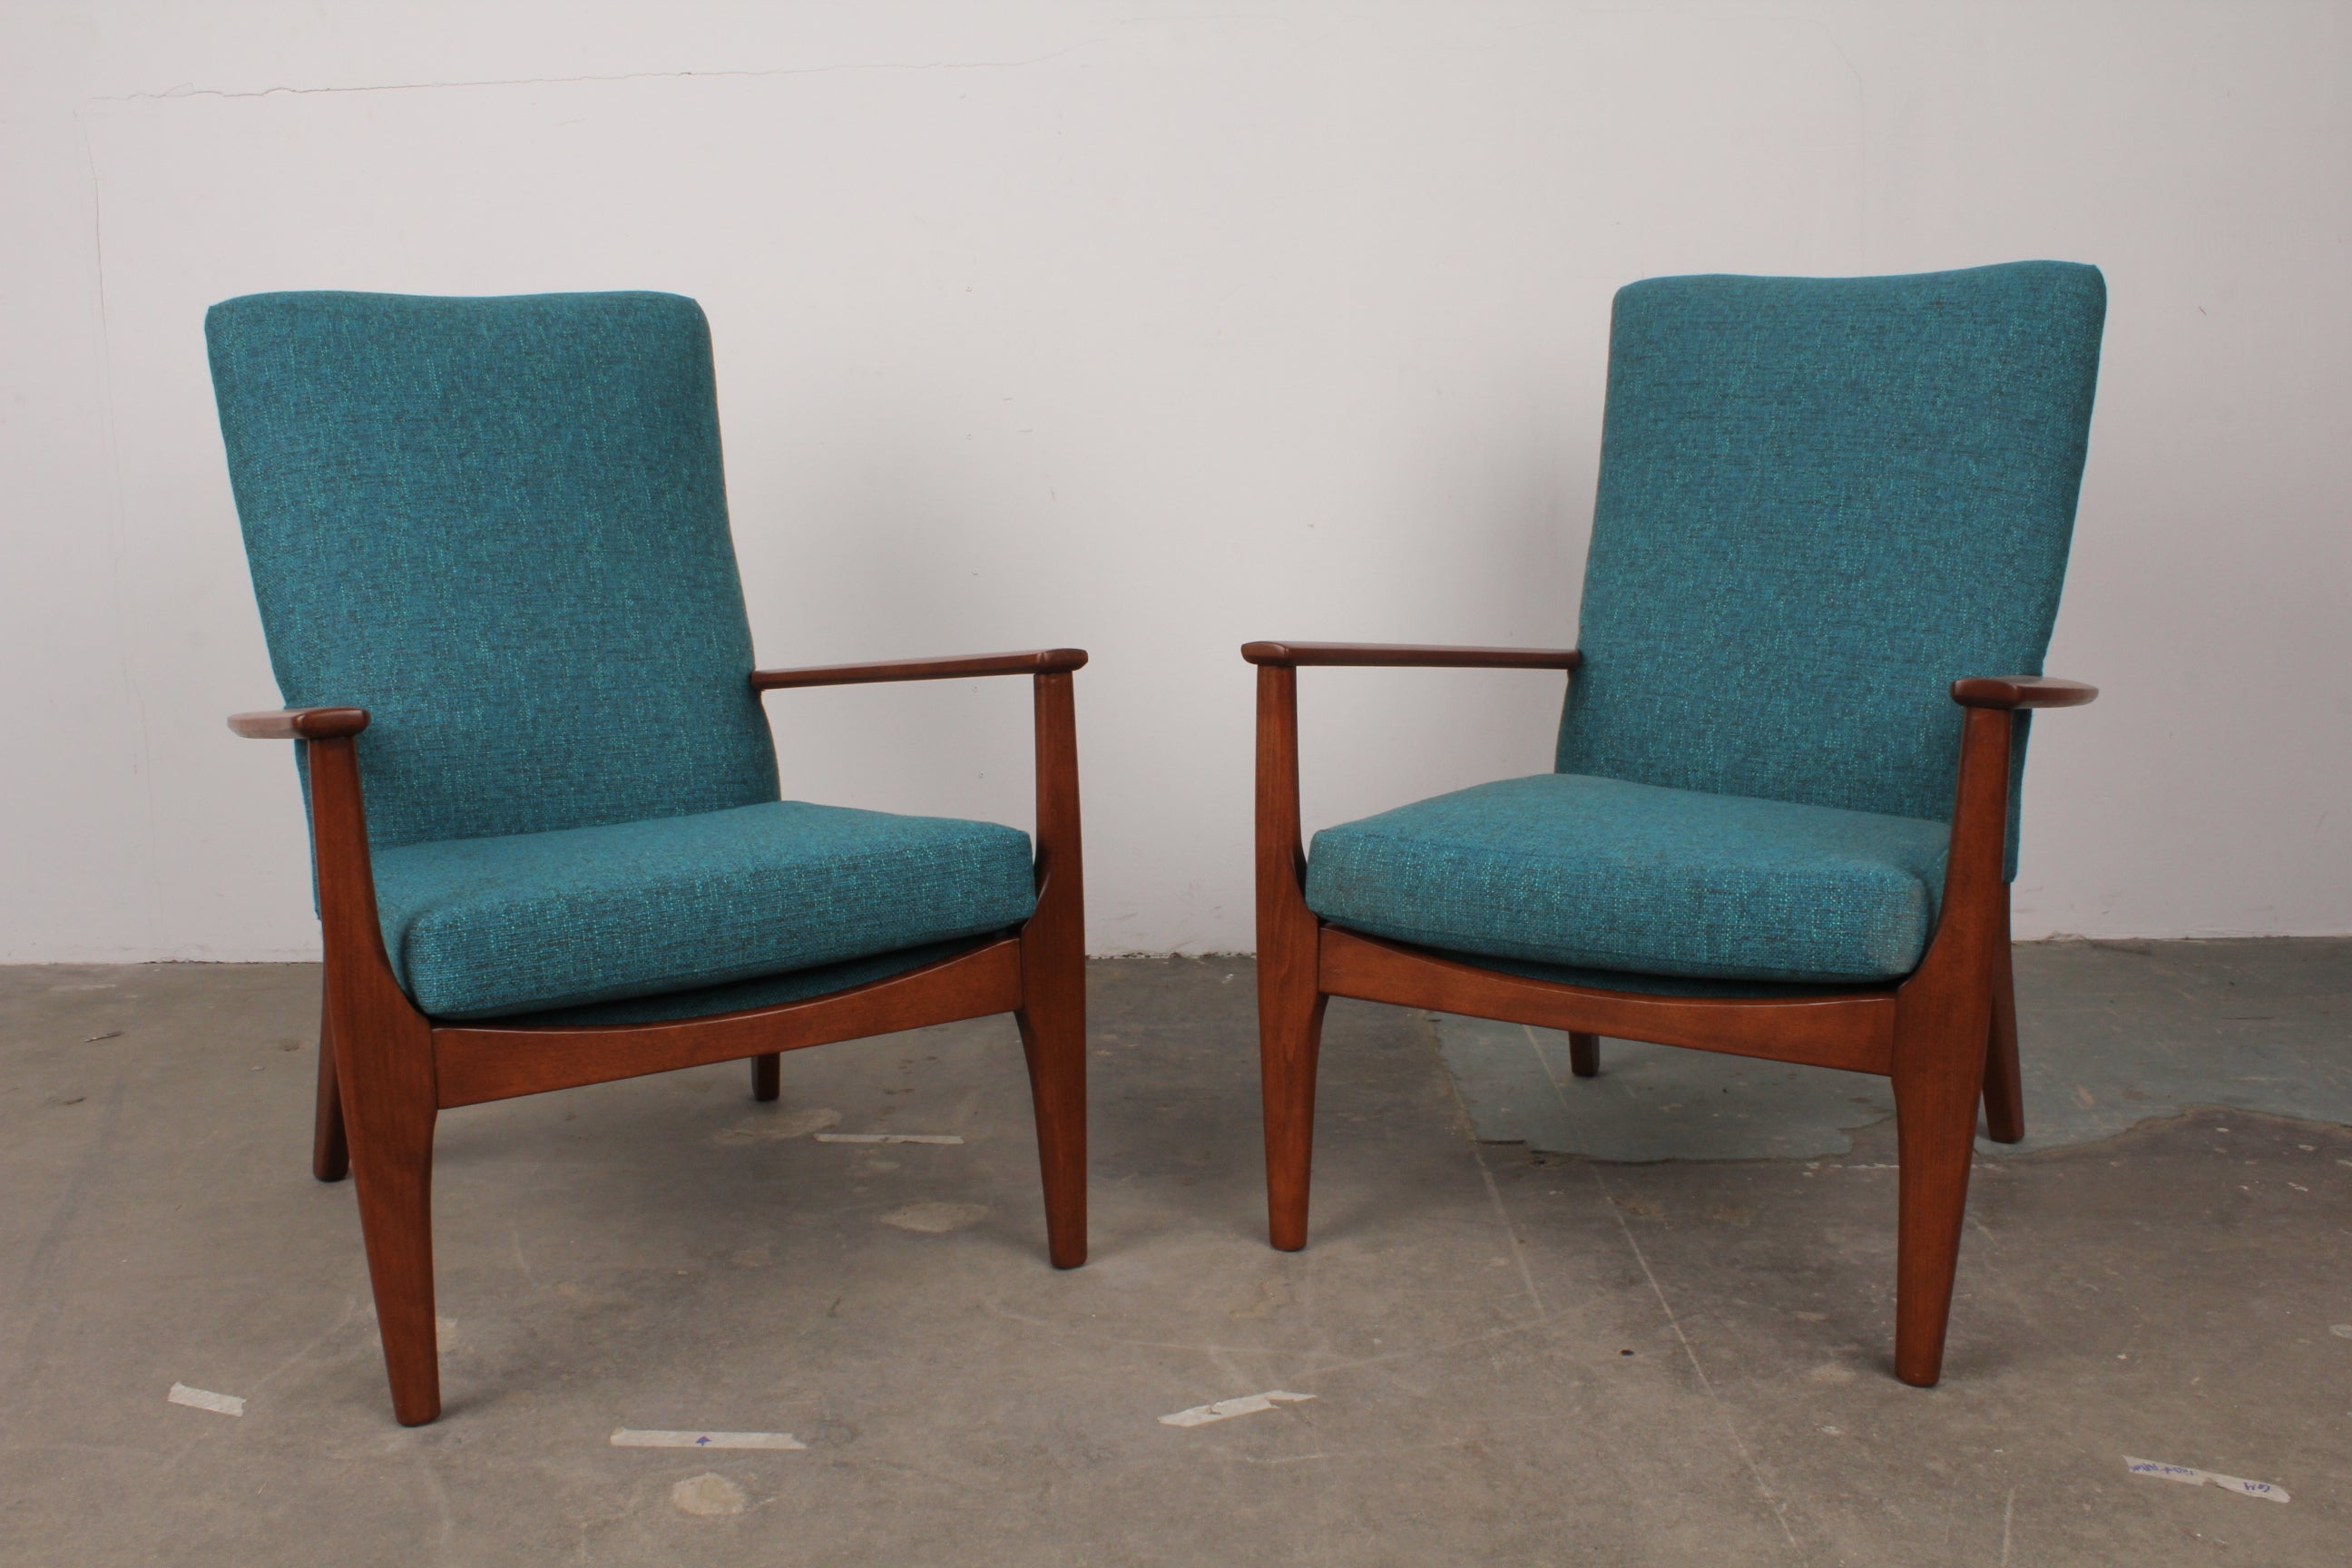 Pair of English Mid Century Modern Lounge Chairs by Parker Knoll.